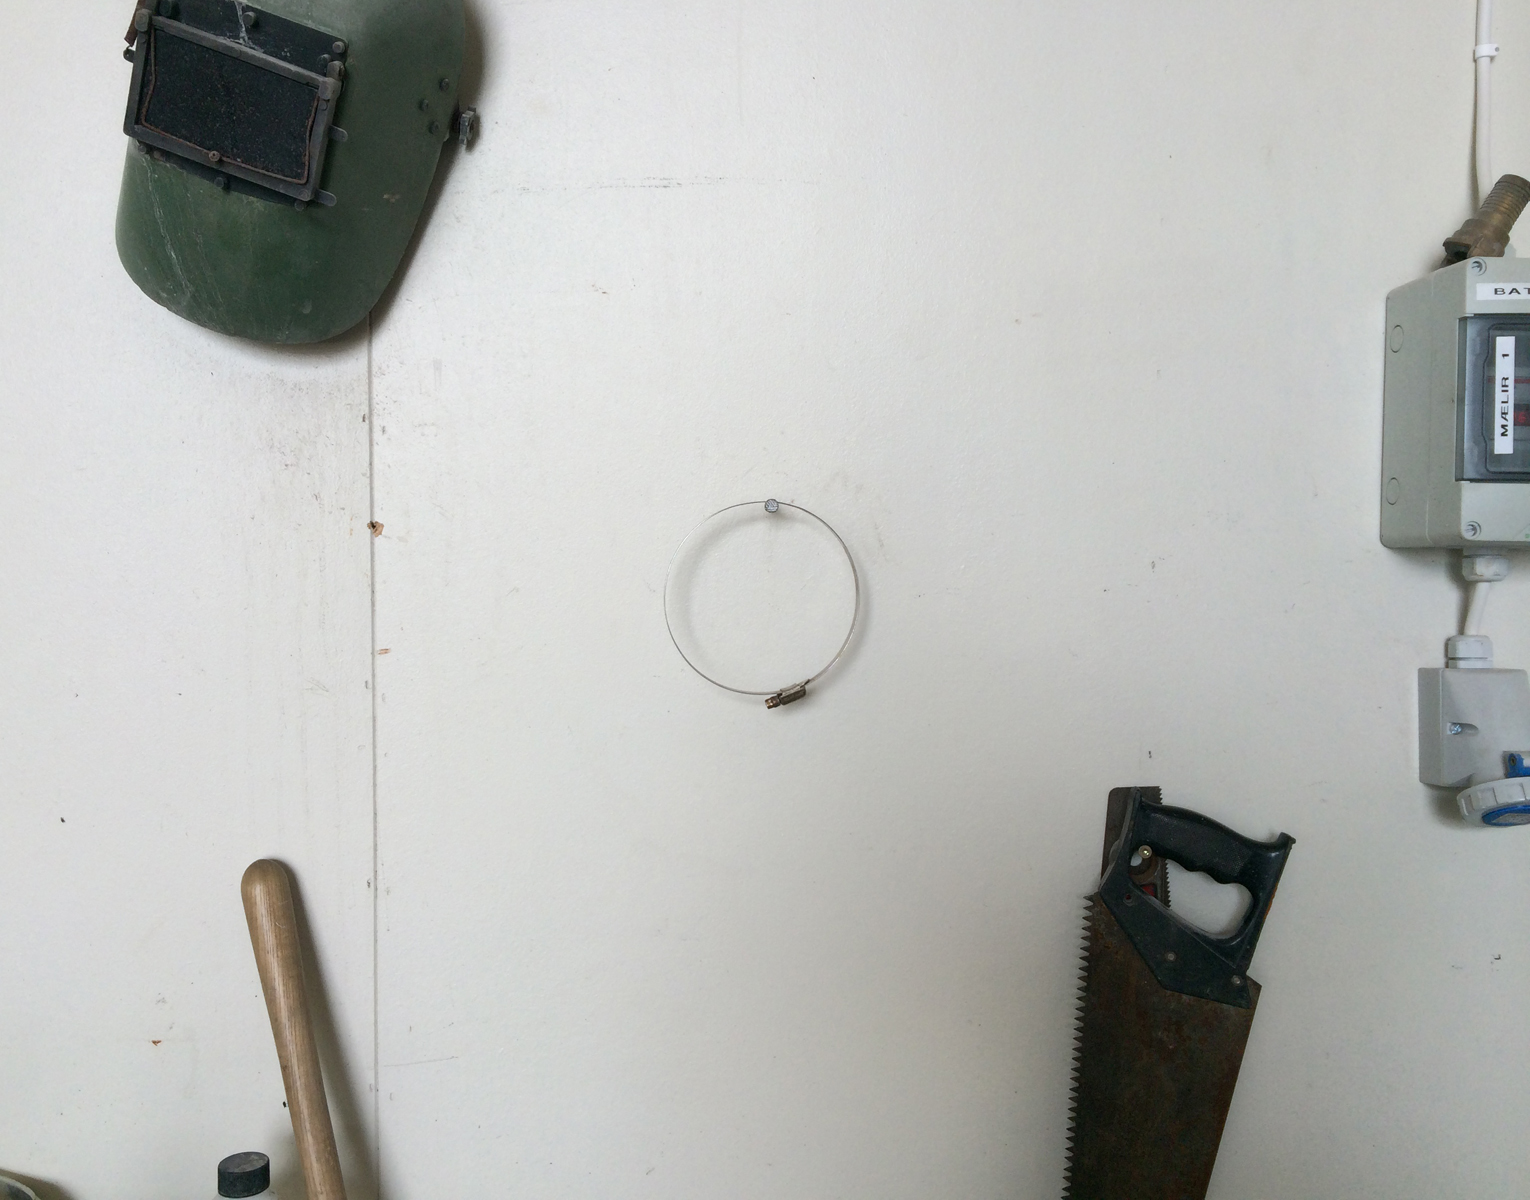 A welders mask, saw and centered circular pipe clamp hang on a white wall.